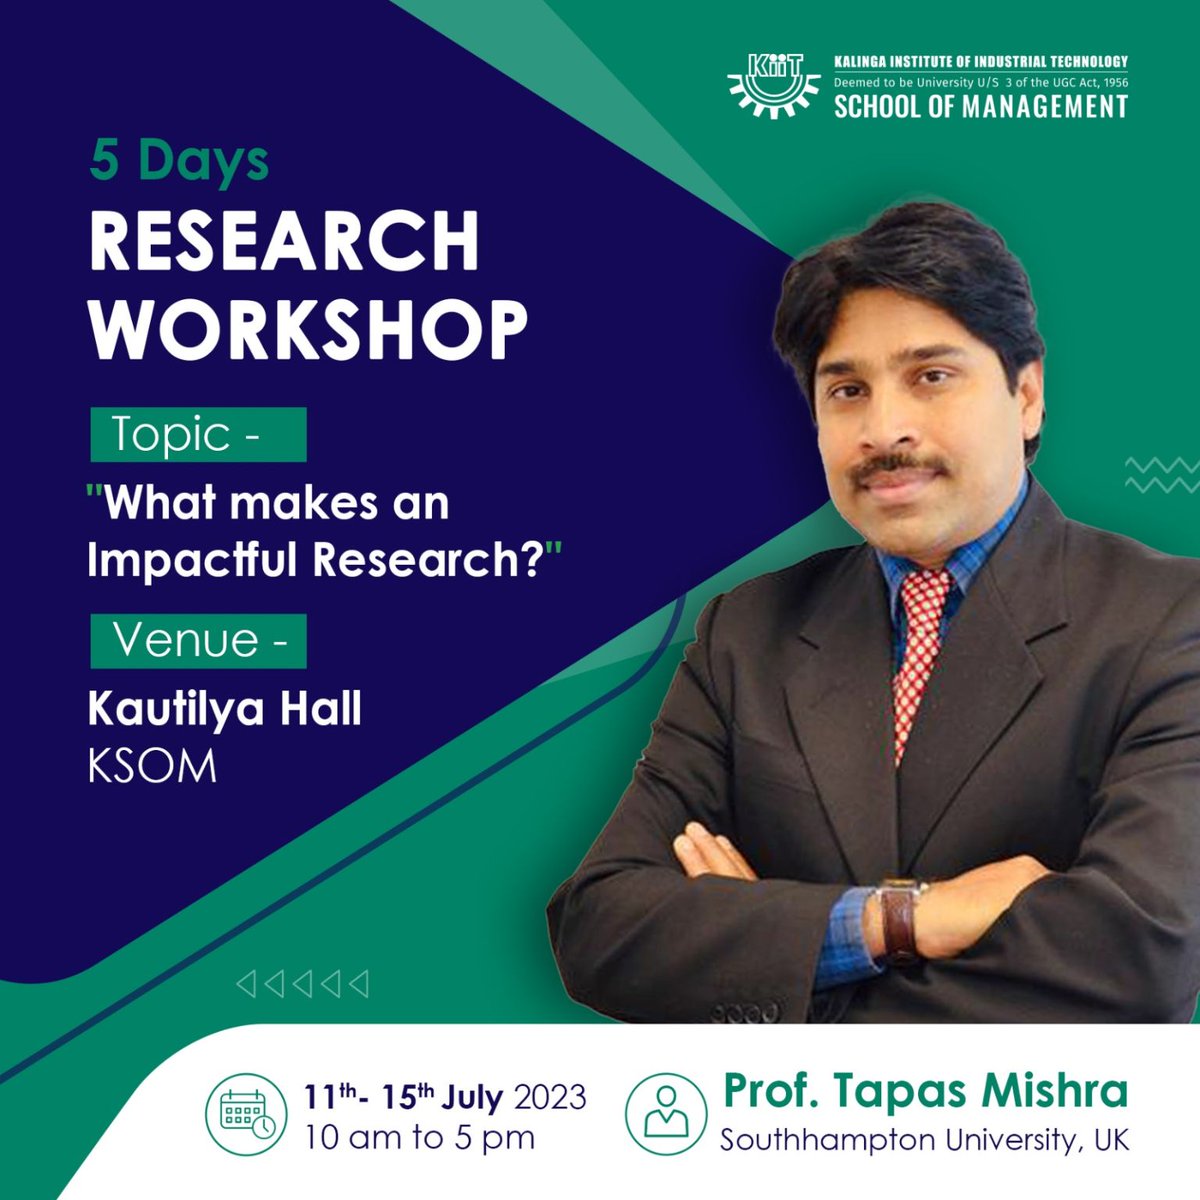 We want to share with you that KSOM extends a hearty welcome to Prof. Tapas Mishra, Southhampton University, UK, for the 5 Day Research Workshop.

#ksombbsr #ResearchWorkshop #kiit #research #workshop #students #university #southhamptonuniversity #unitedkingdom #bbsr #odisha